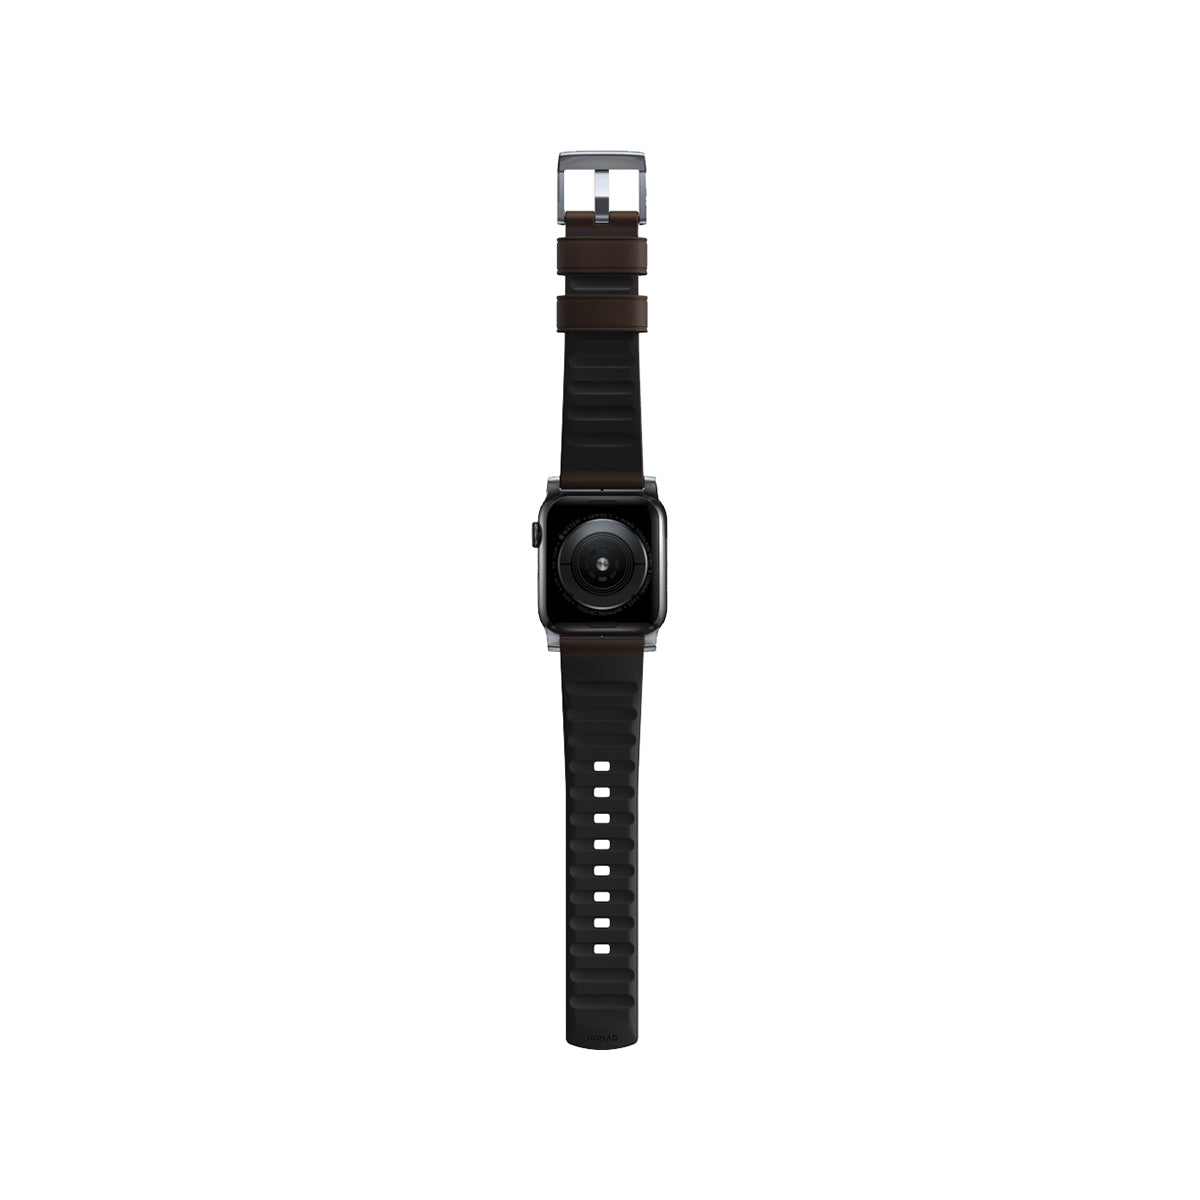 Nomad Active Band Pro 45mm - Silver Hard with Brown Leather Strap.